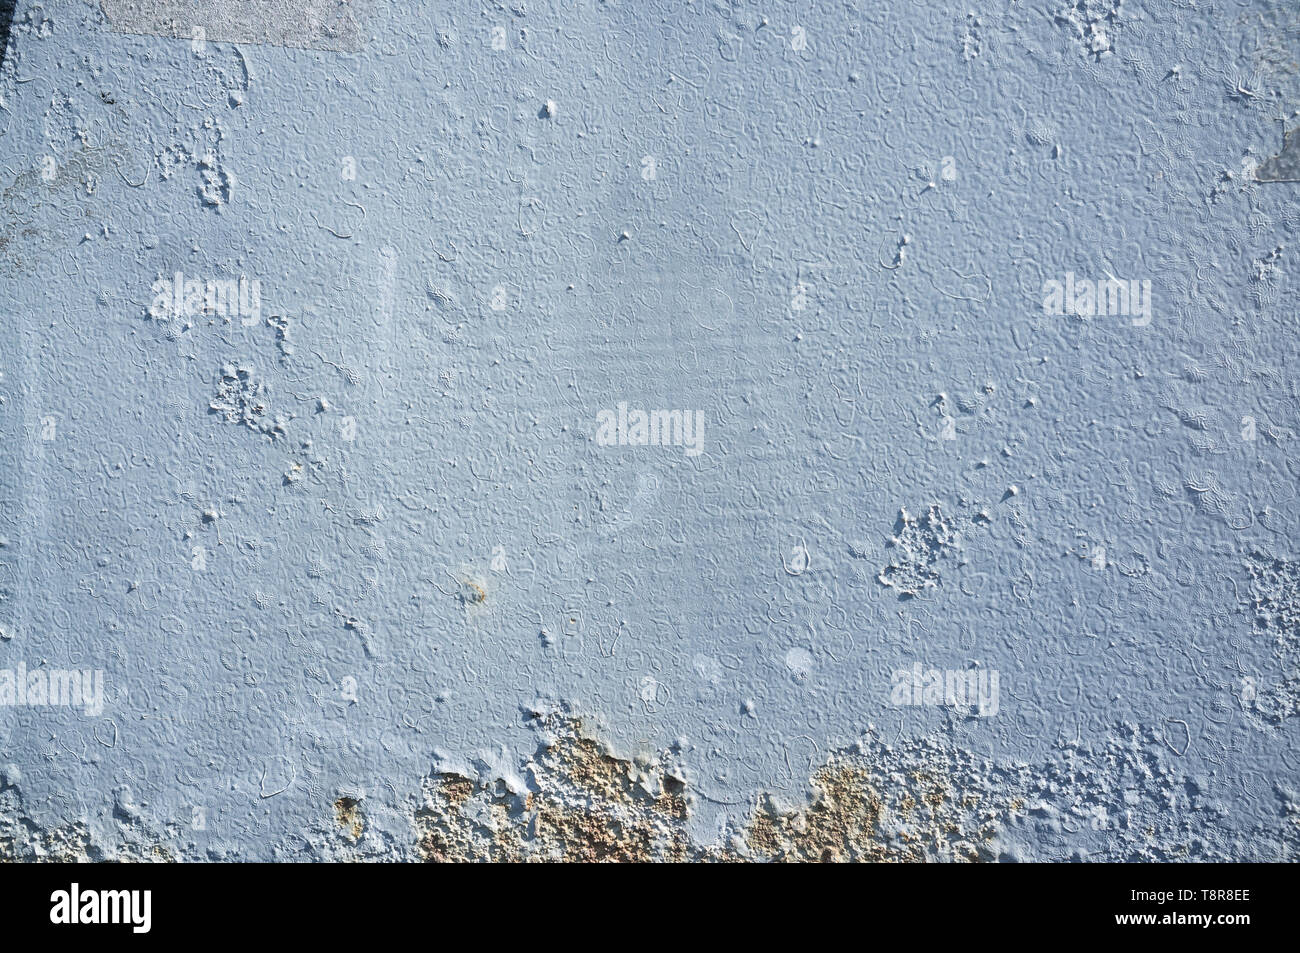 Weathered, Crumbly and Aged Wall with Blue Paint Desquamation Texture Stock Photo